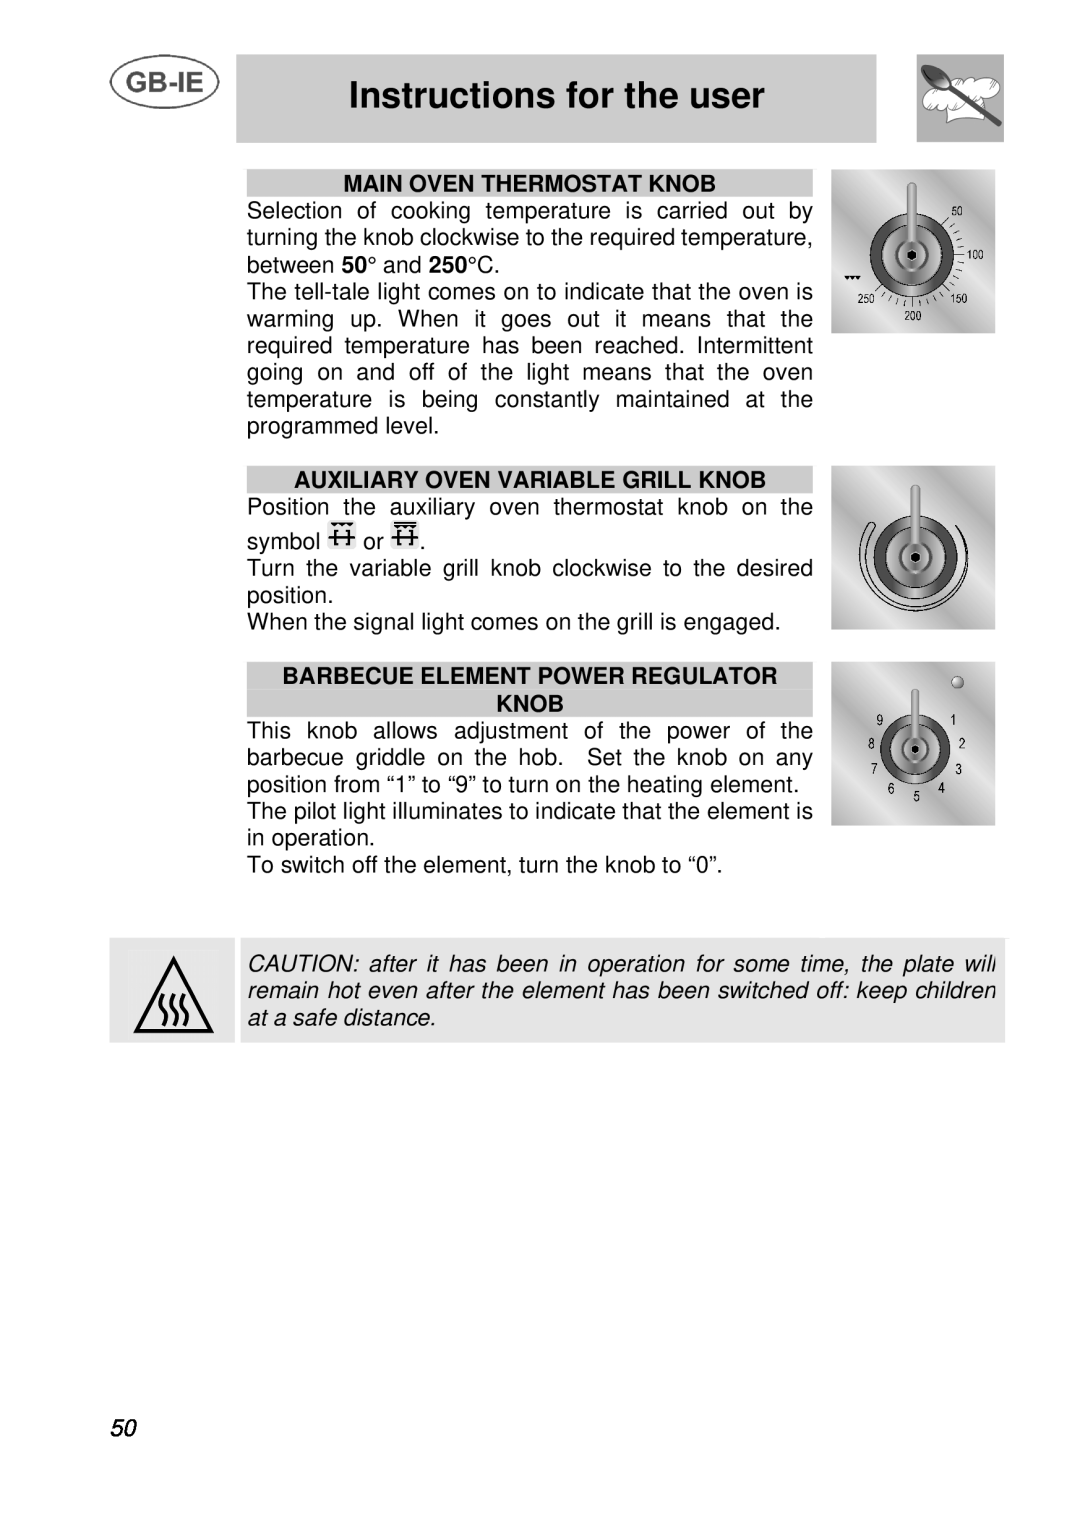 Smeg A3 manual Instructions for the user, Main Oven Thermostat Knob, Auxiliary Oven Variable Grill Knob 